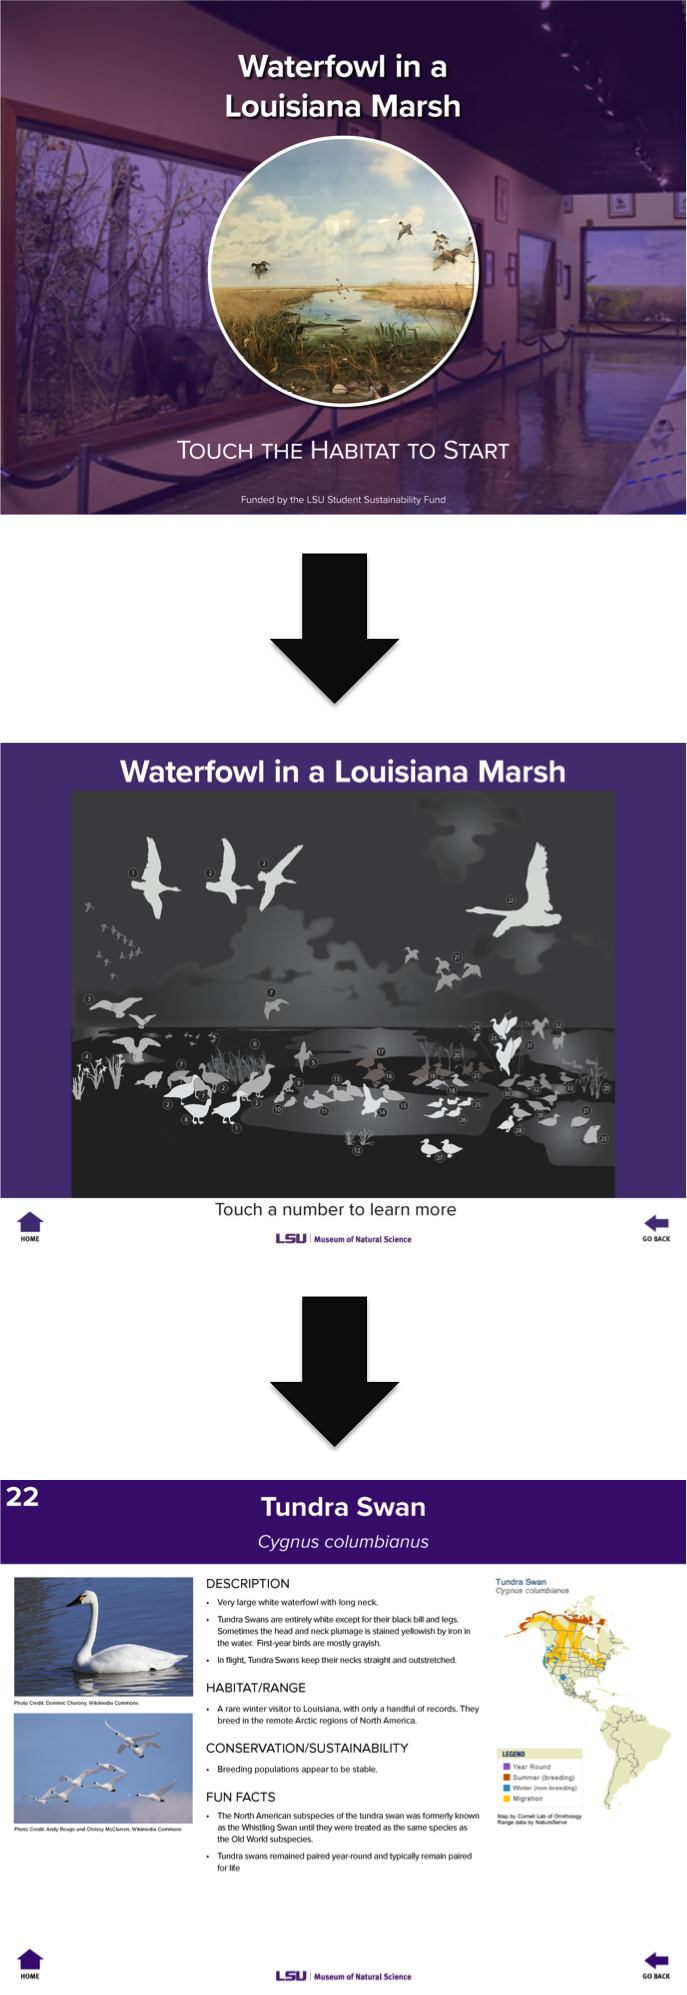 Exploring the ipad. It goes from the marsh exhibit home page, to a silhouette of the exhibit, to information about the tundra swan.